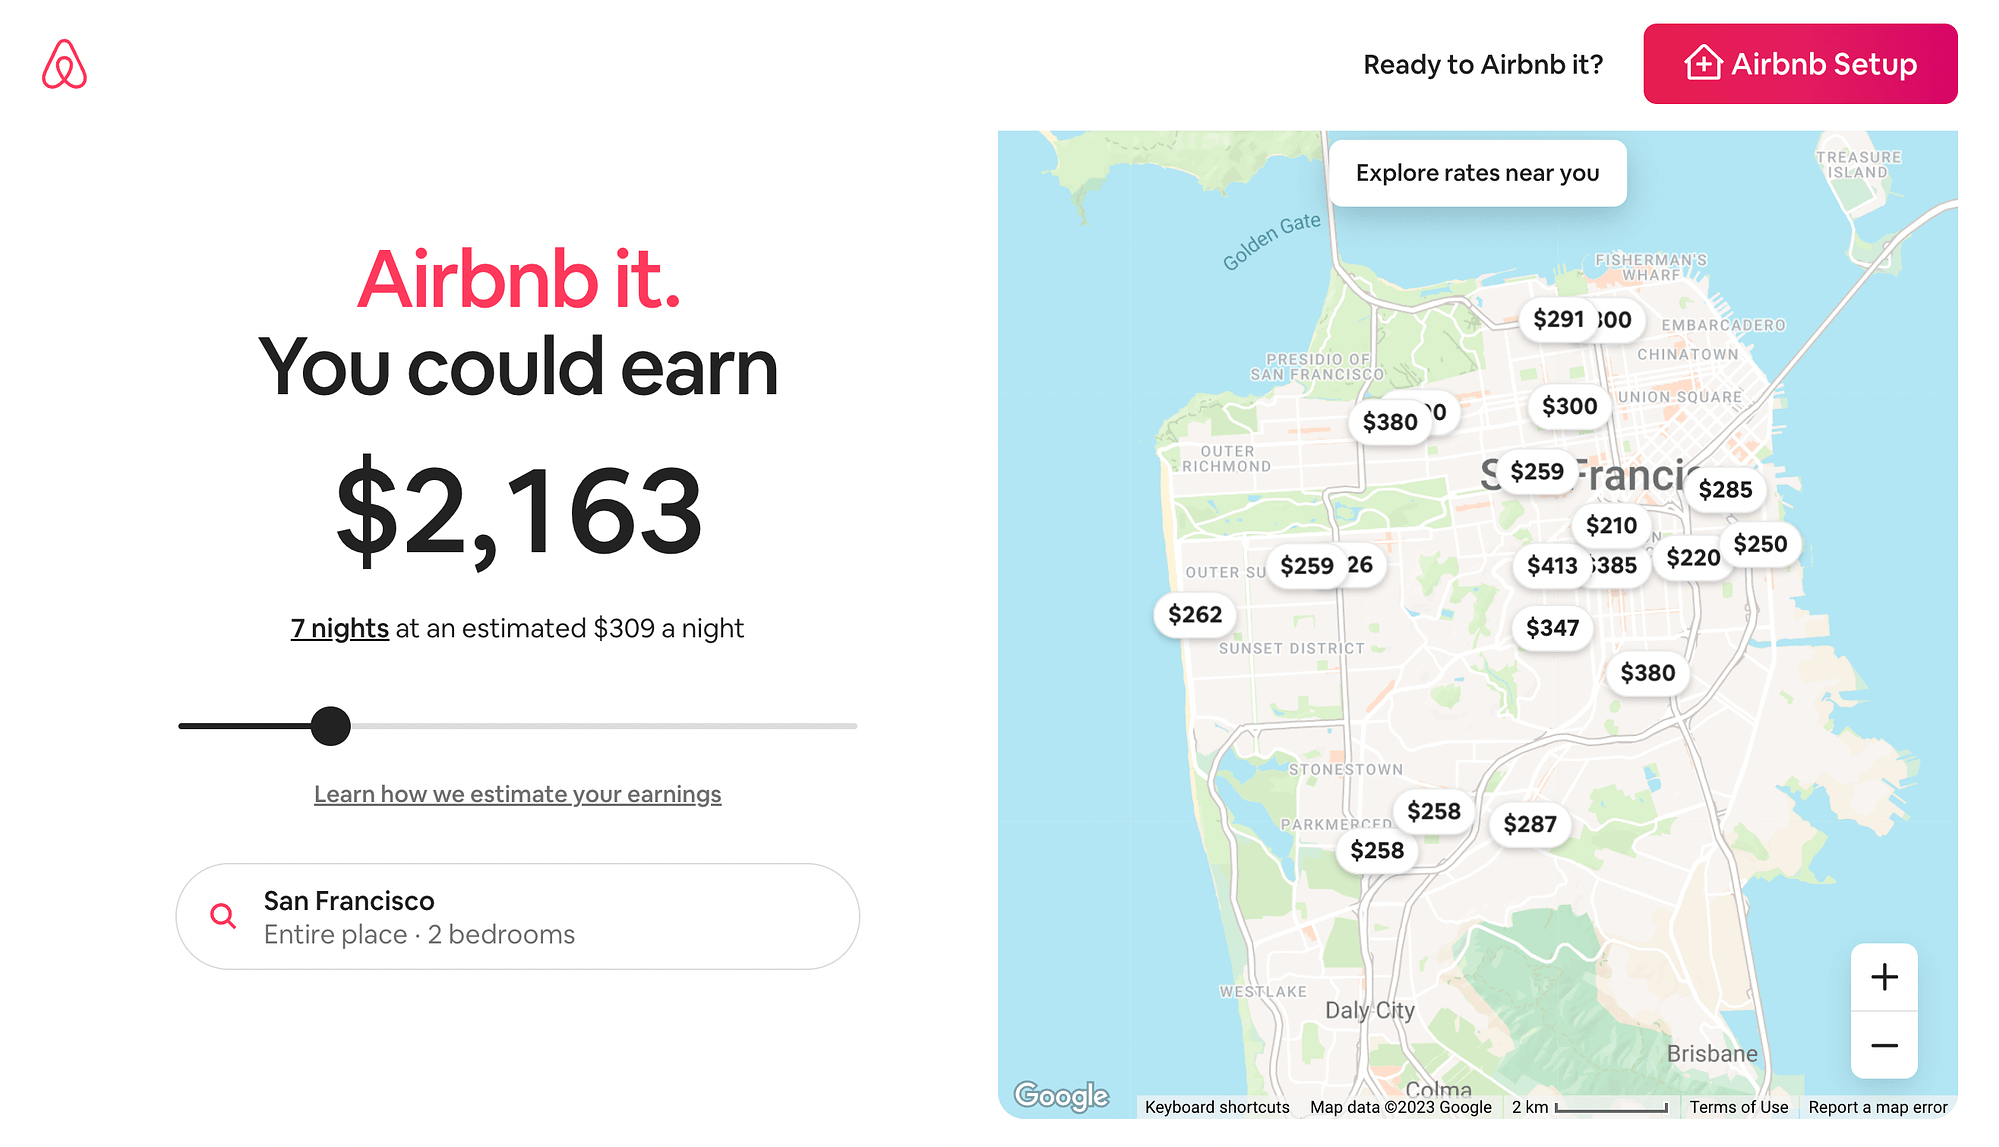 Airbnb and their landing page.